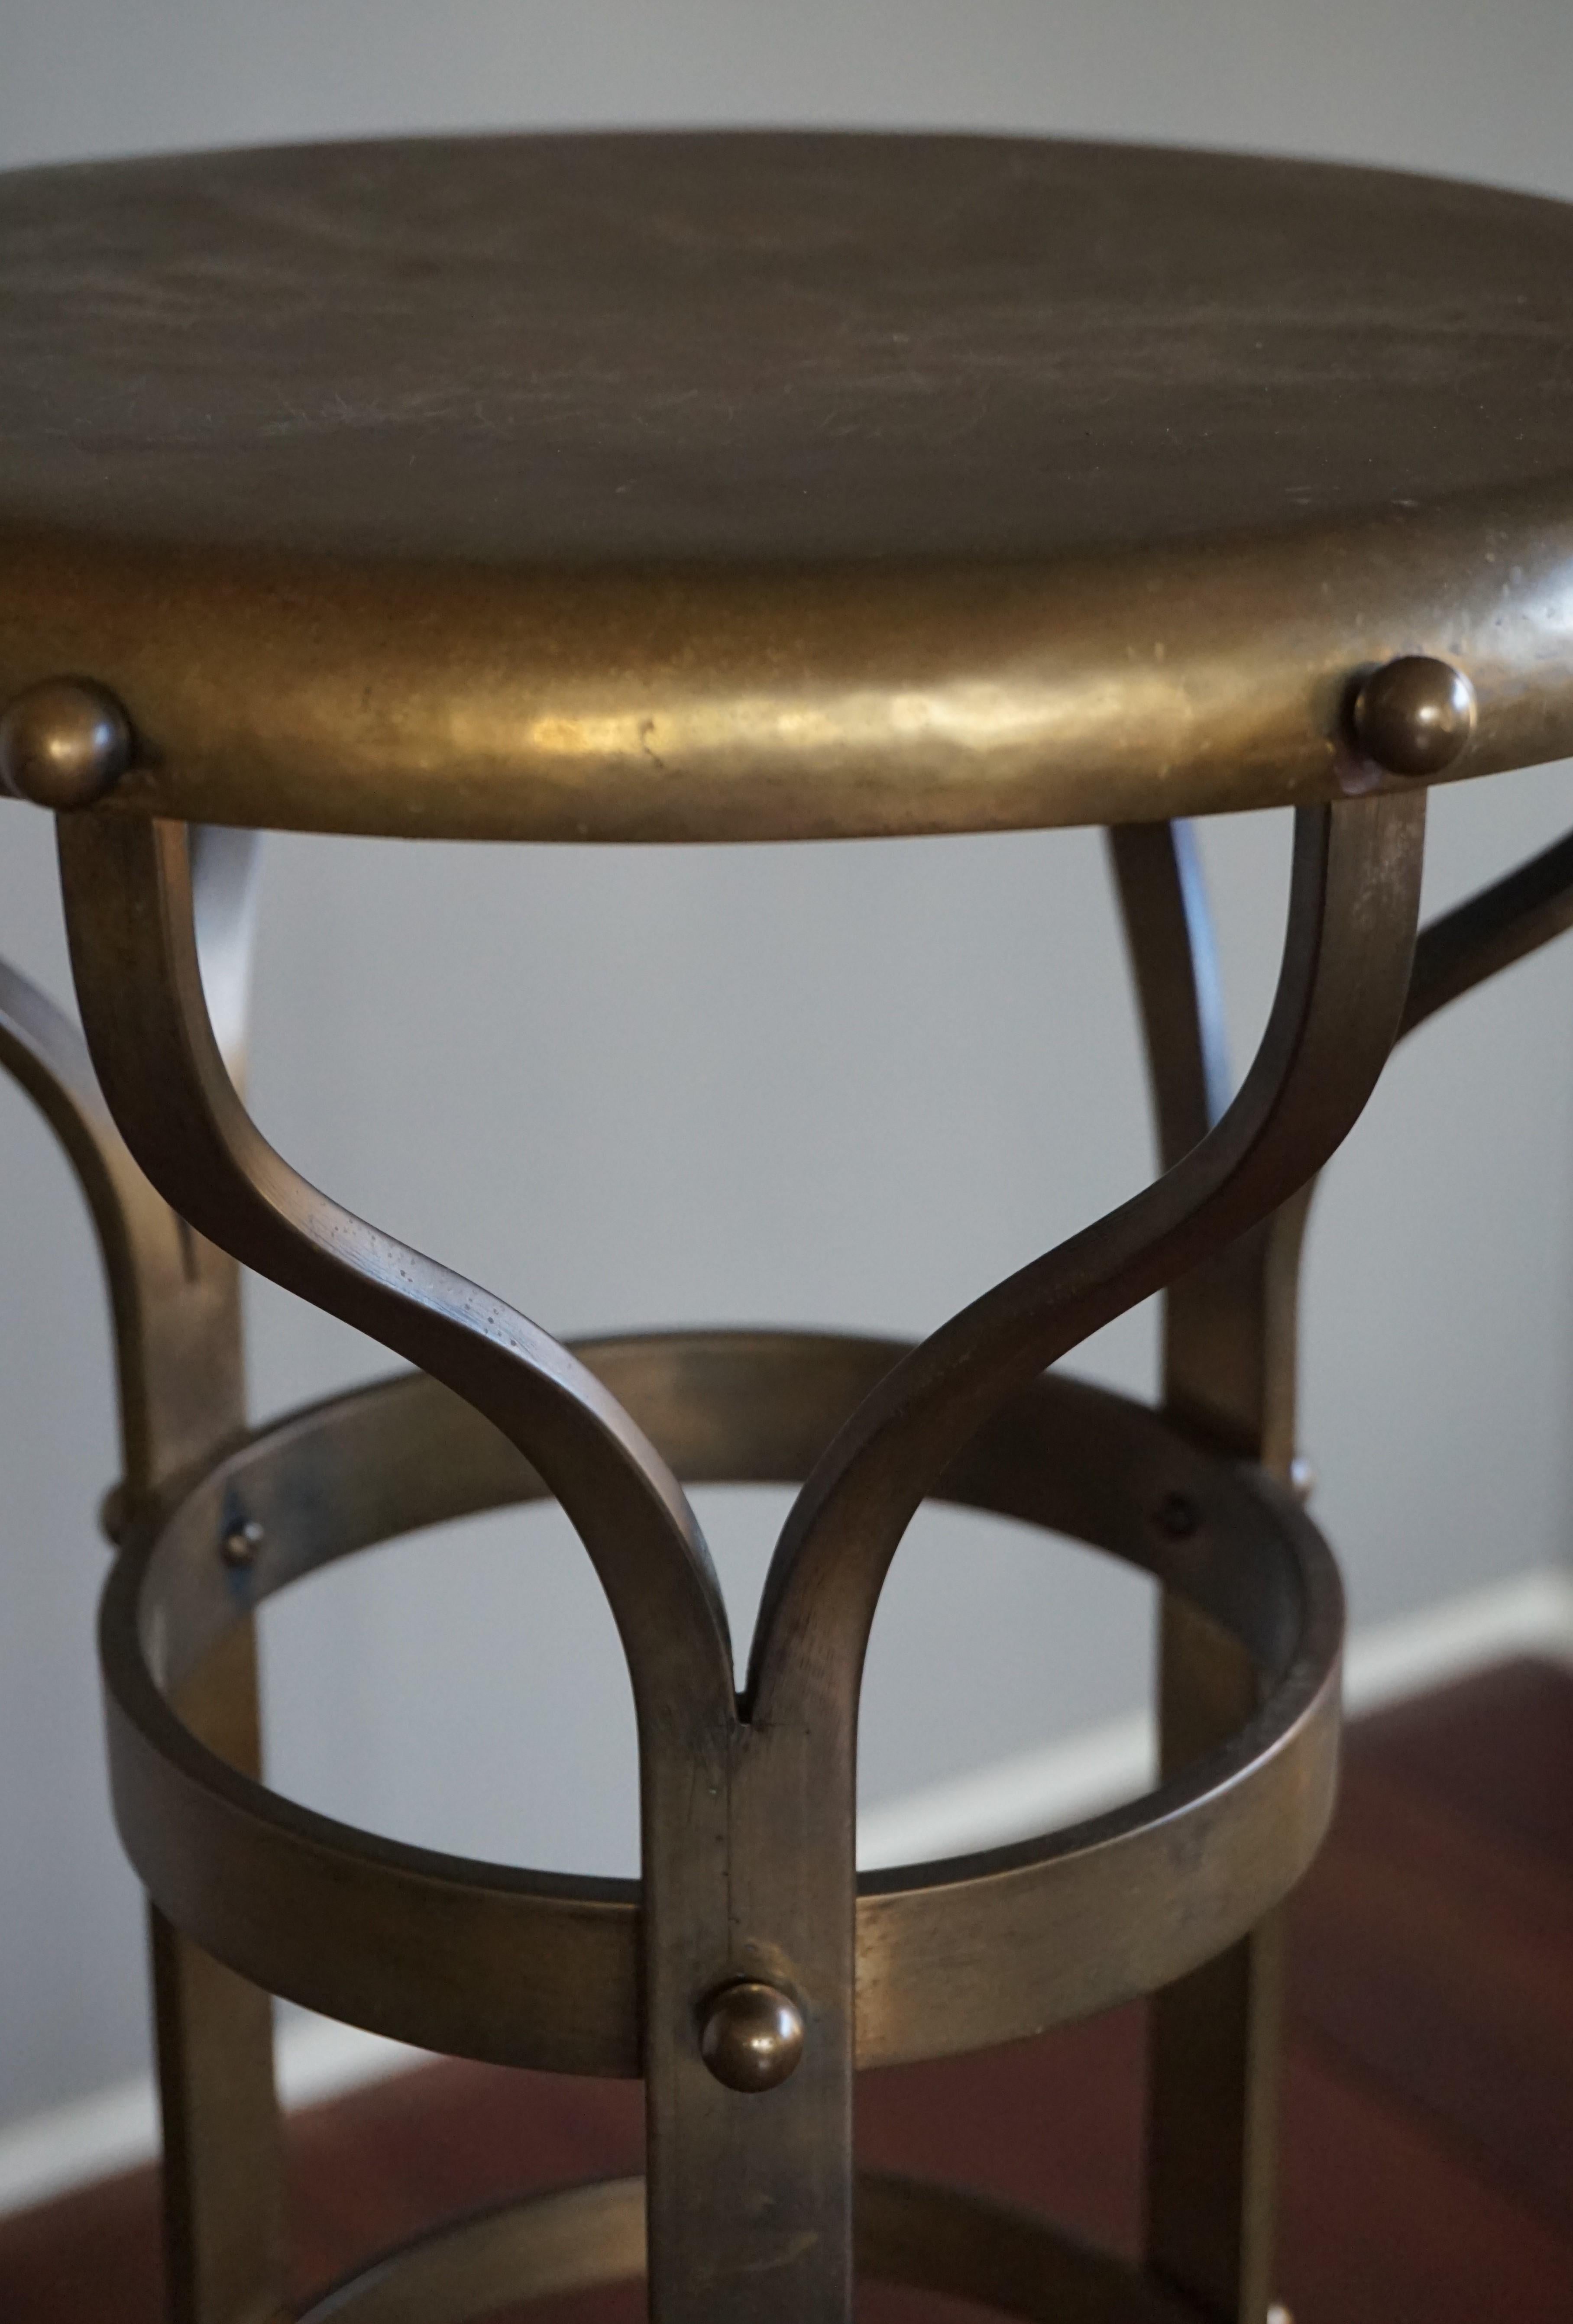 Hand-Crafted Striking and Top Quality Made Solid Brass Arts & Crafts Pedestal Sculpture Stand